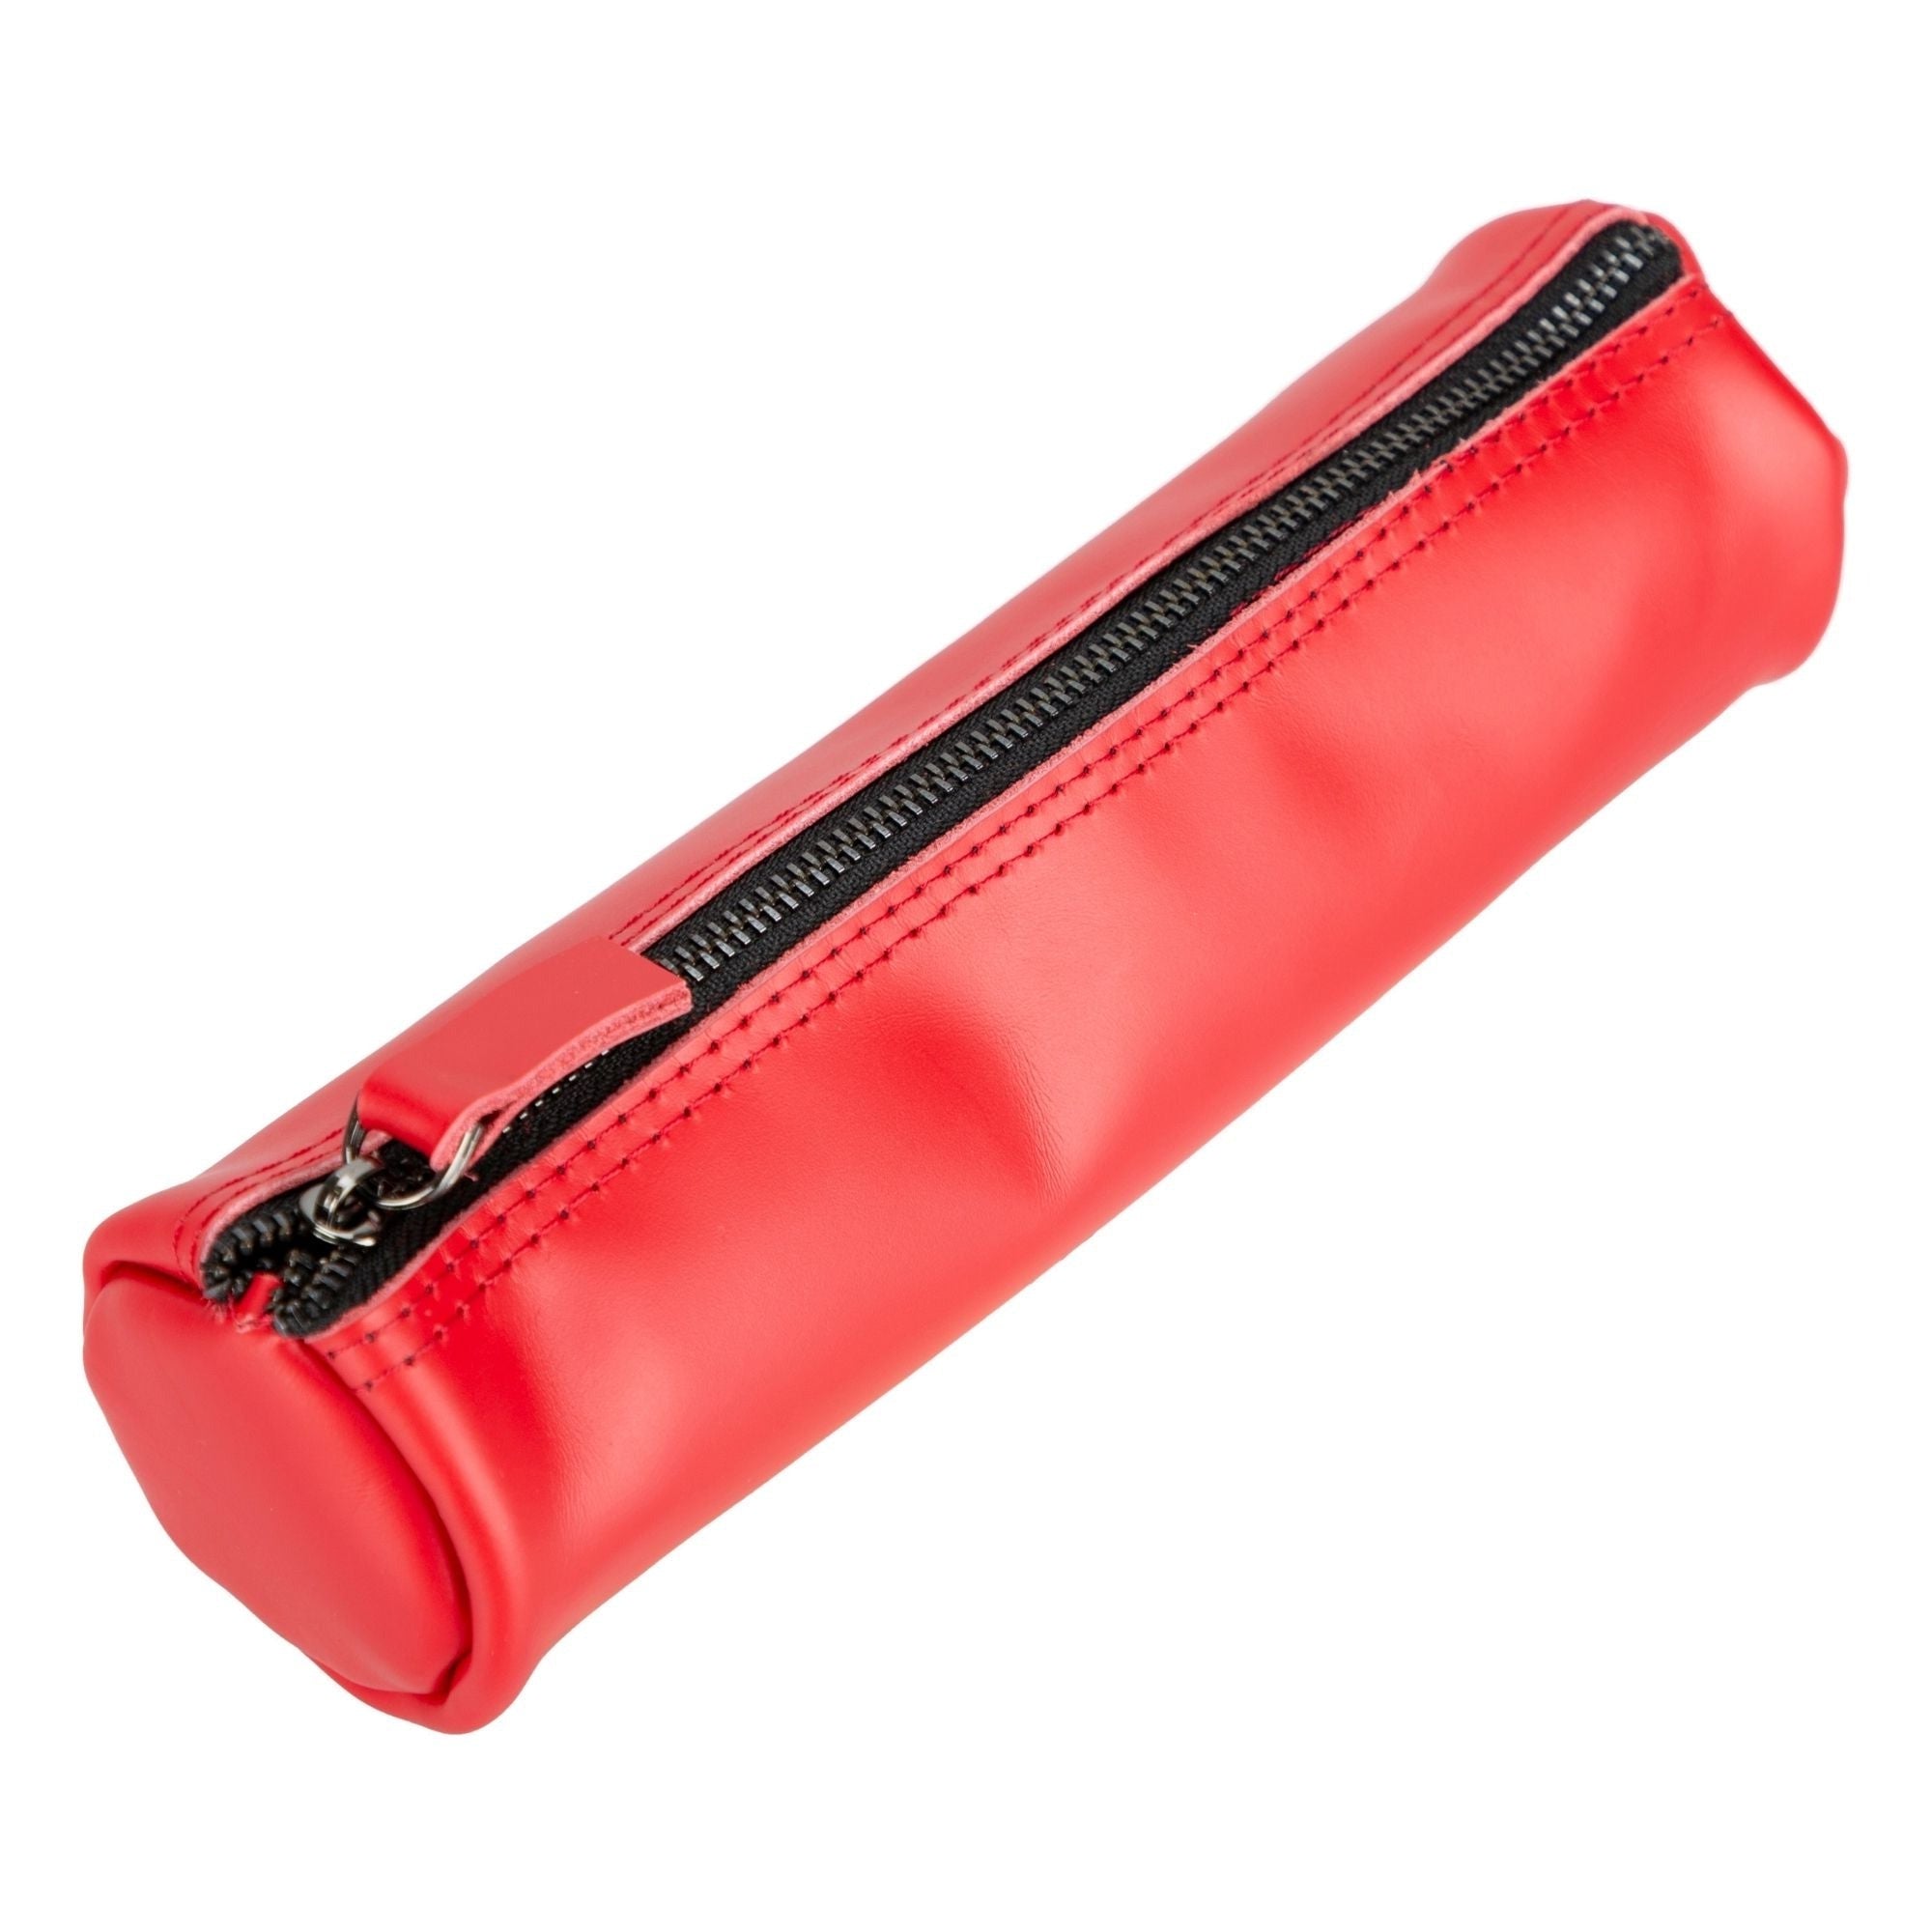 Pen Case, Pencil Case, Pencil Case, Pencil Case, Real Leather, Red, Silver,  Handmade, Small Zip 